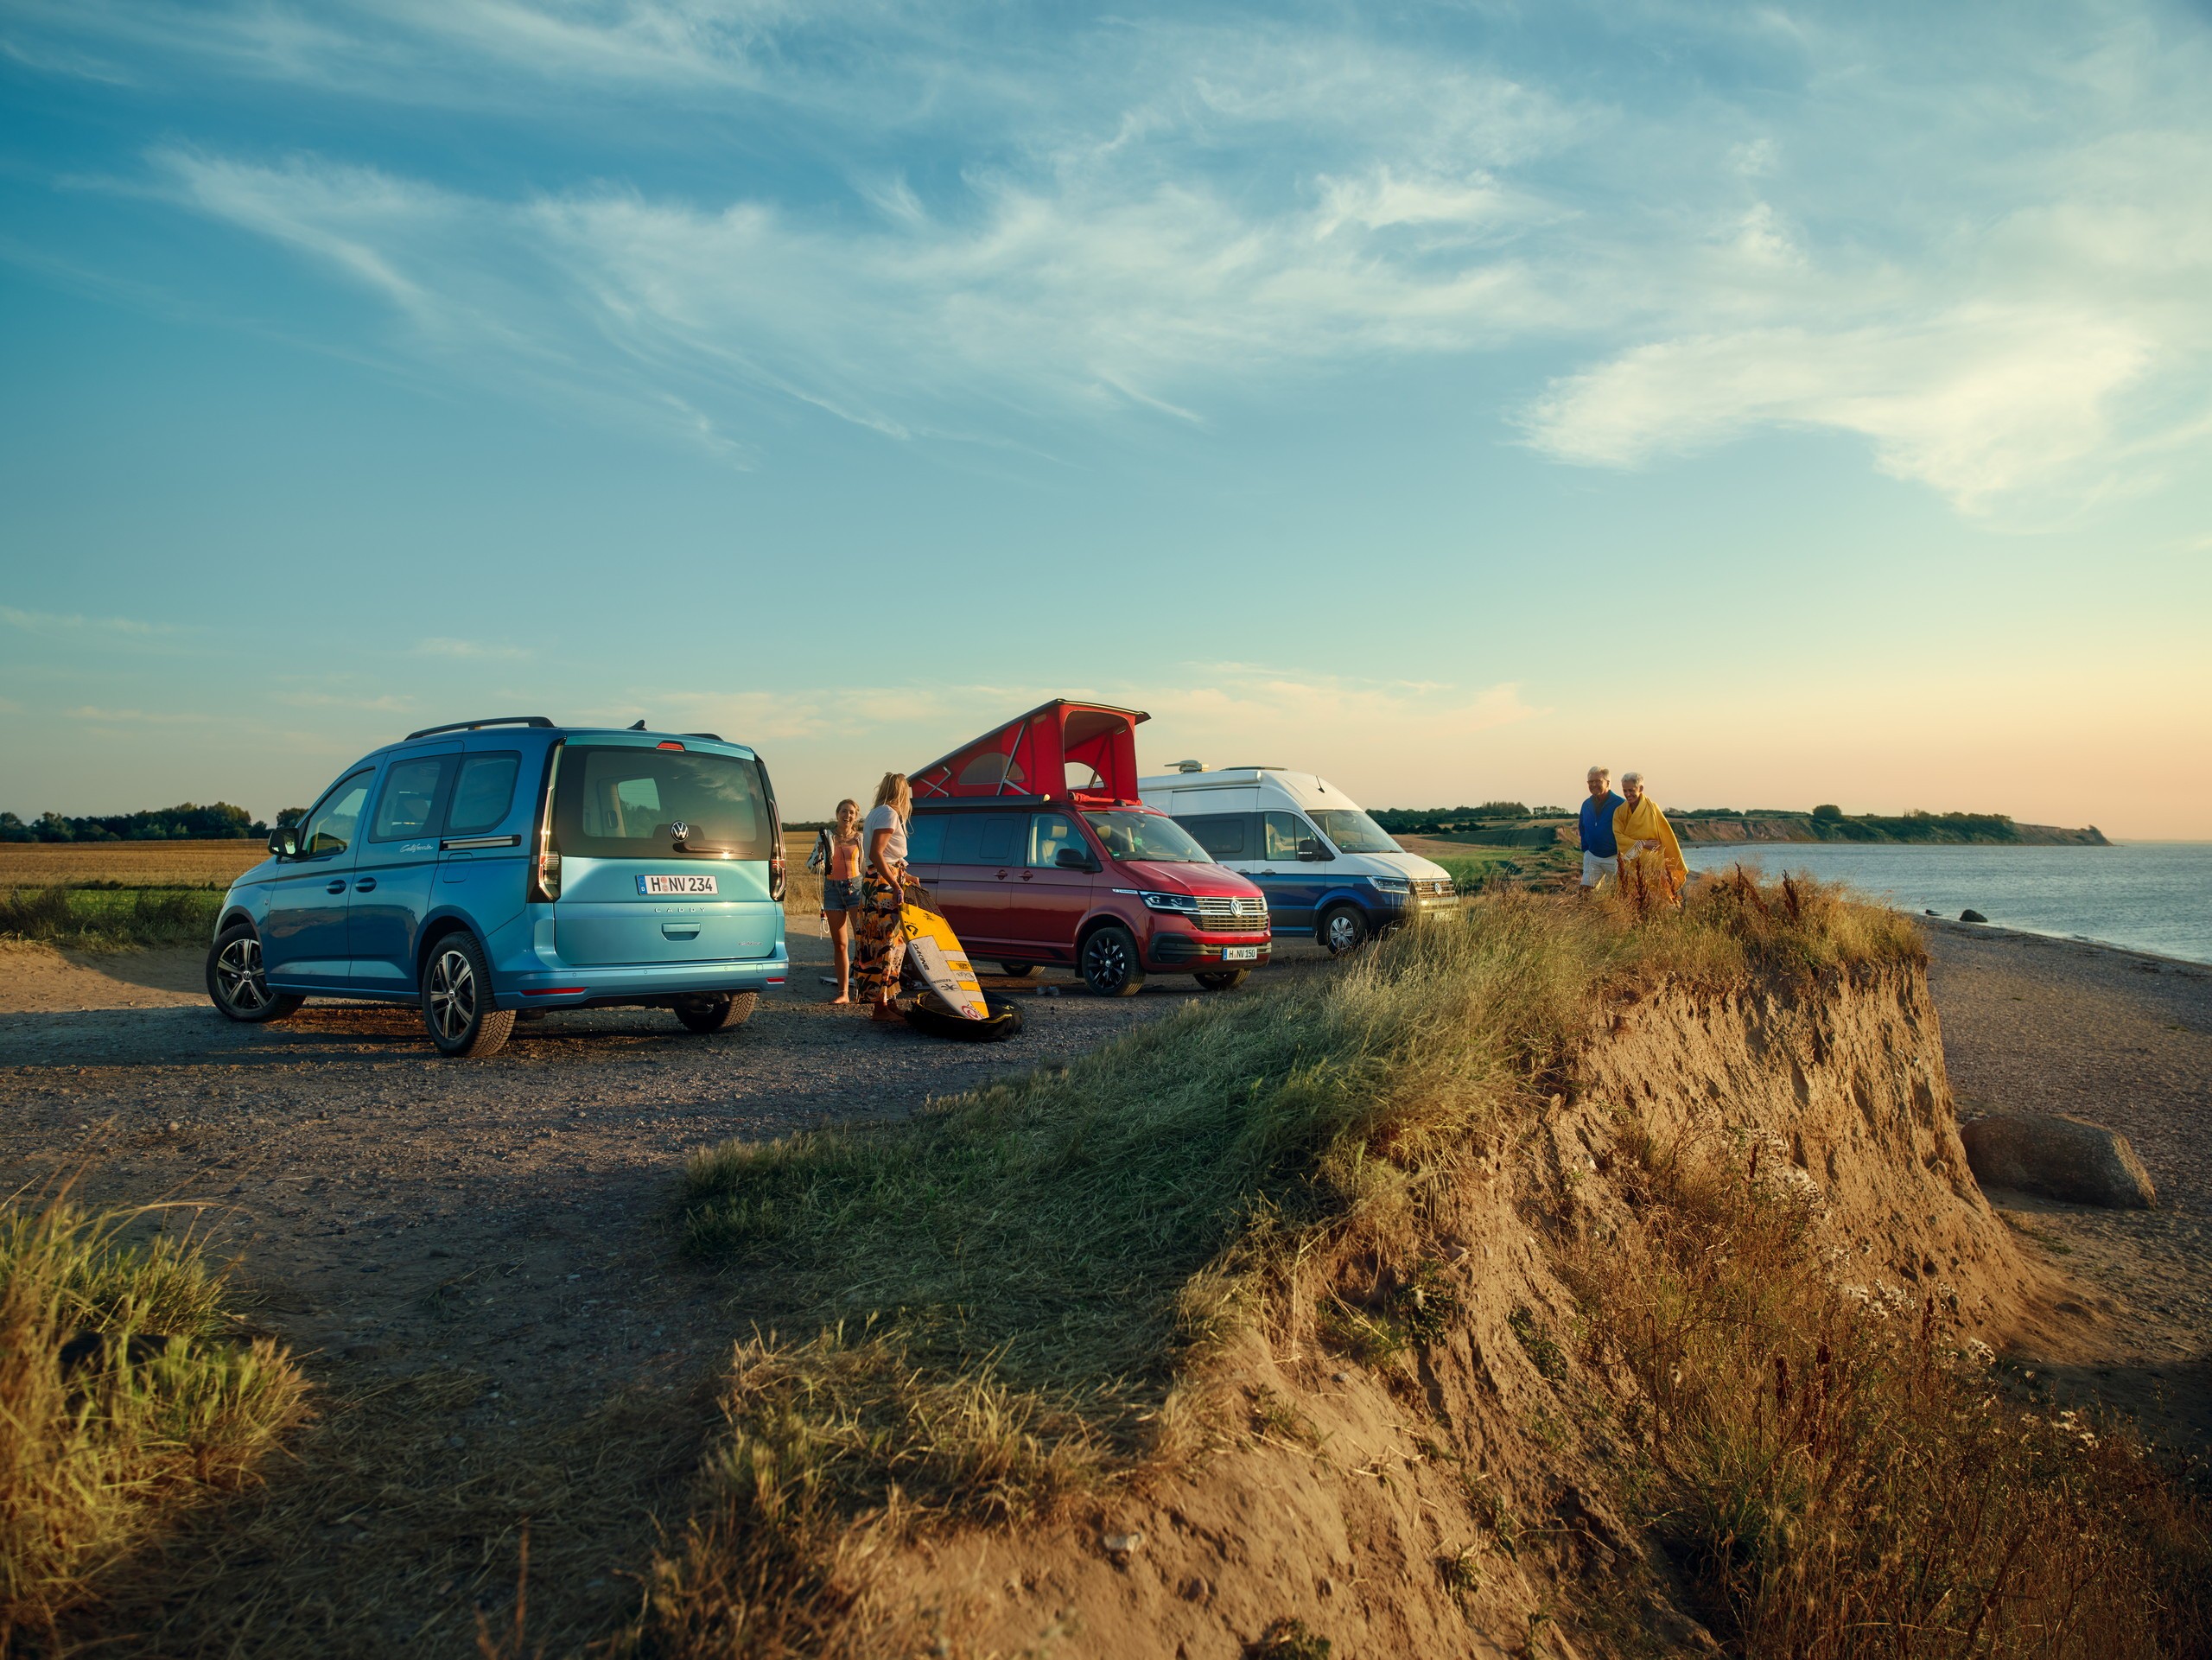 https://s1.cdn.autoevolution.com/images/news/gallery/vw-california-campervan-family-ready-for-adventure-on-and-off-the-lit-path_11.jpg